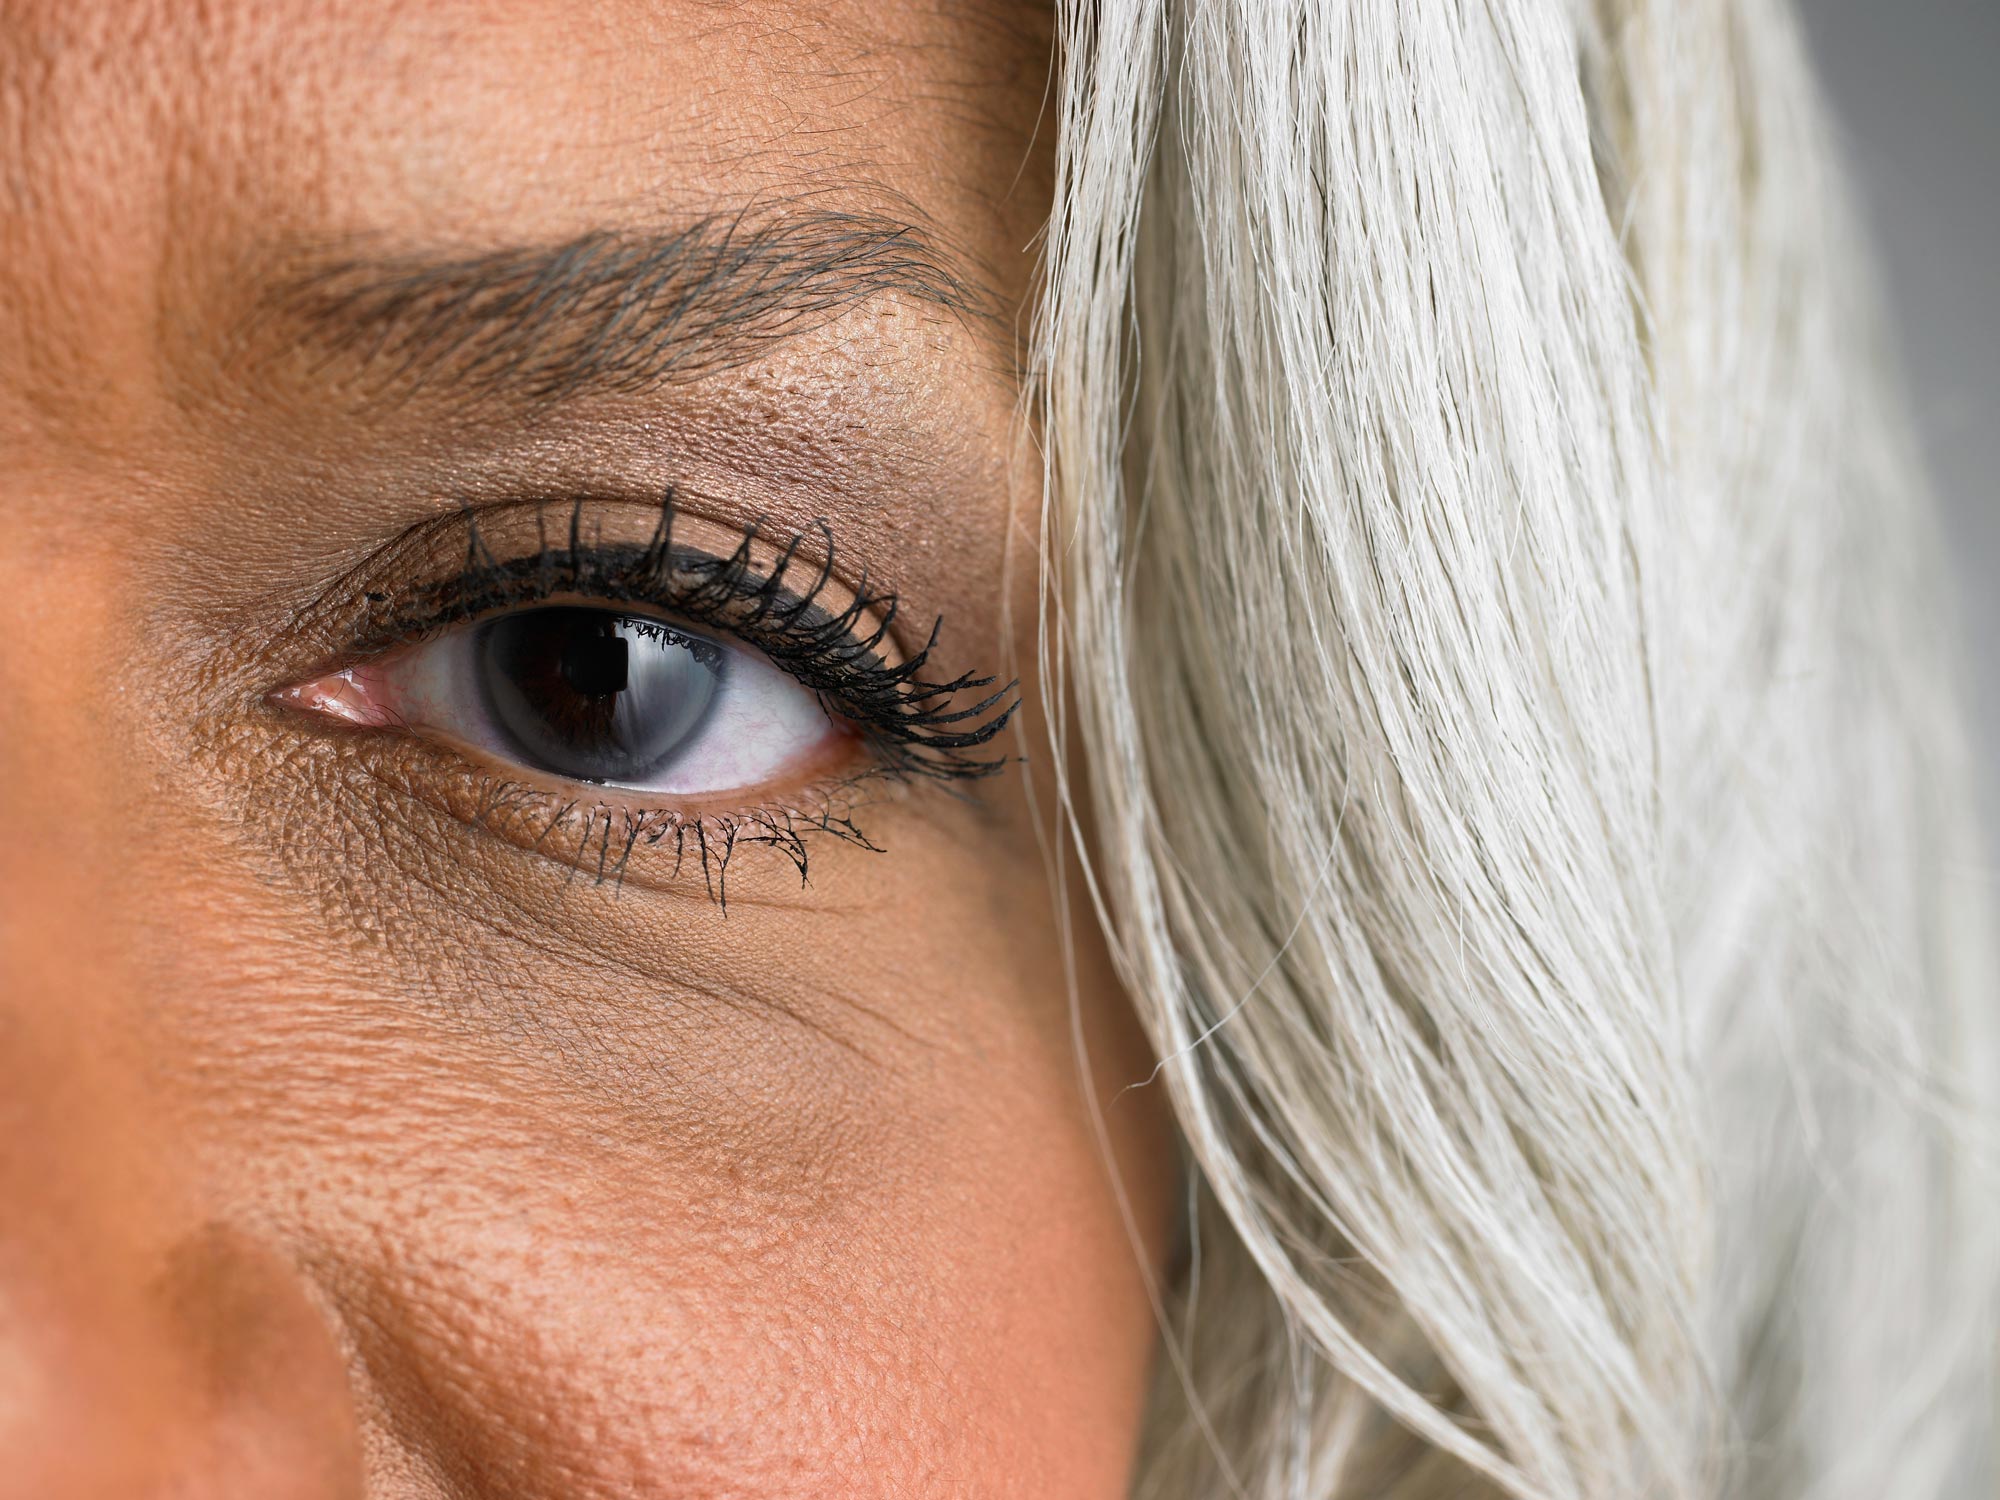 Top 5 nutrients to fight age-related eye disease